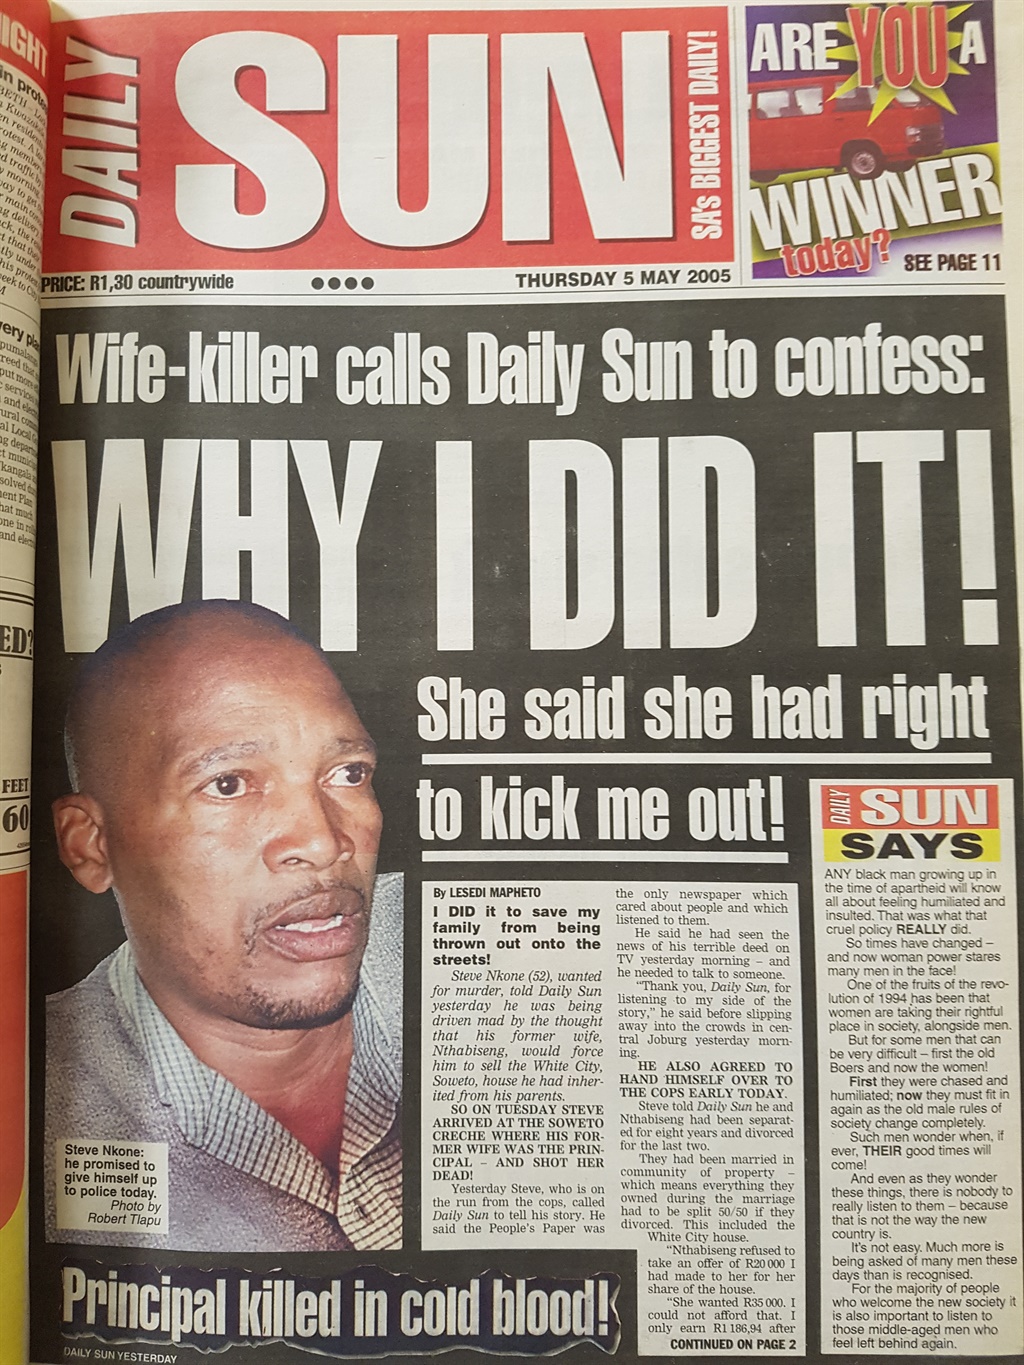 How Pastor lied for sex! - Daily Sun - iSERVICE 